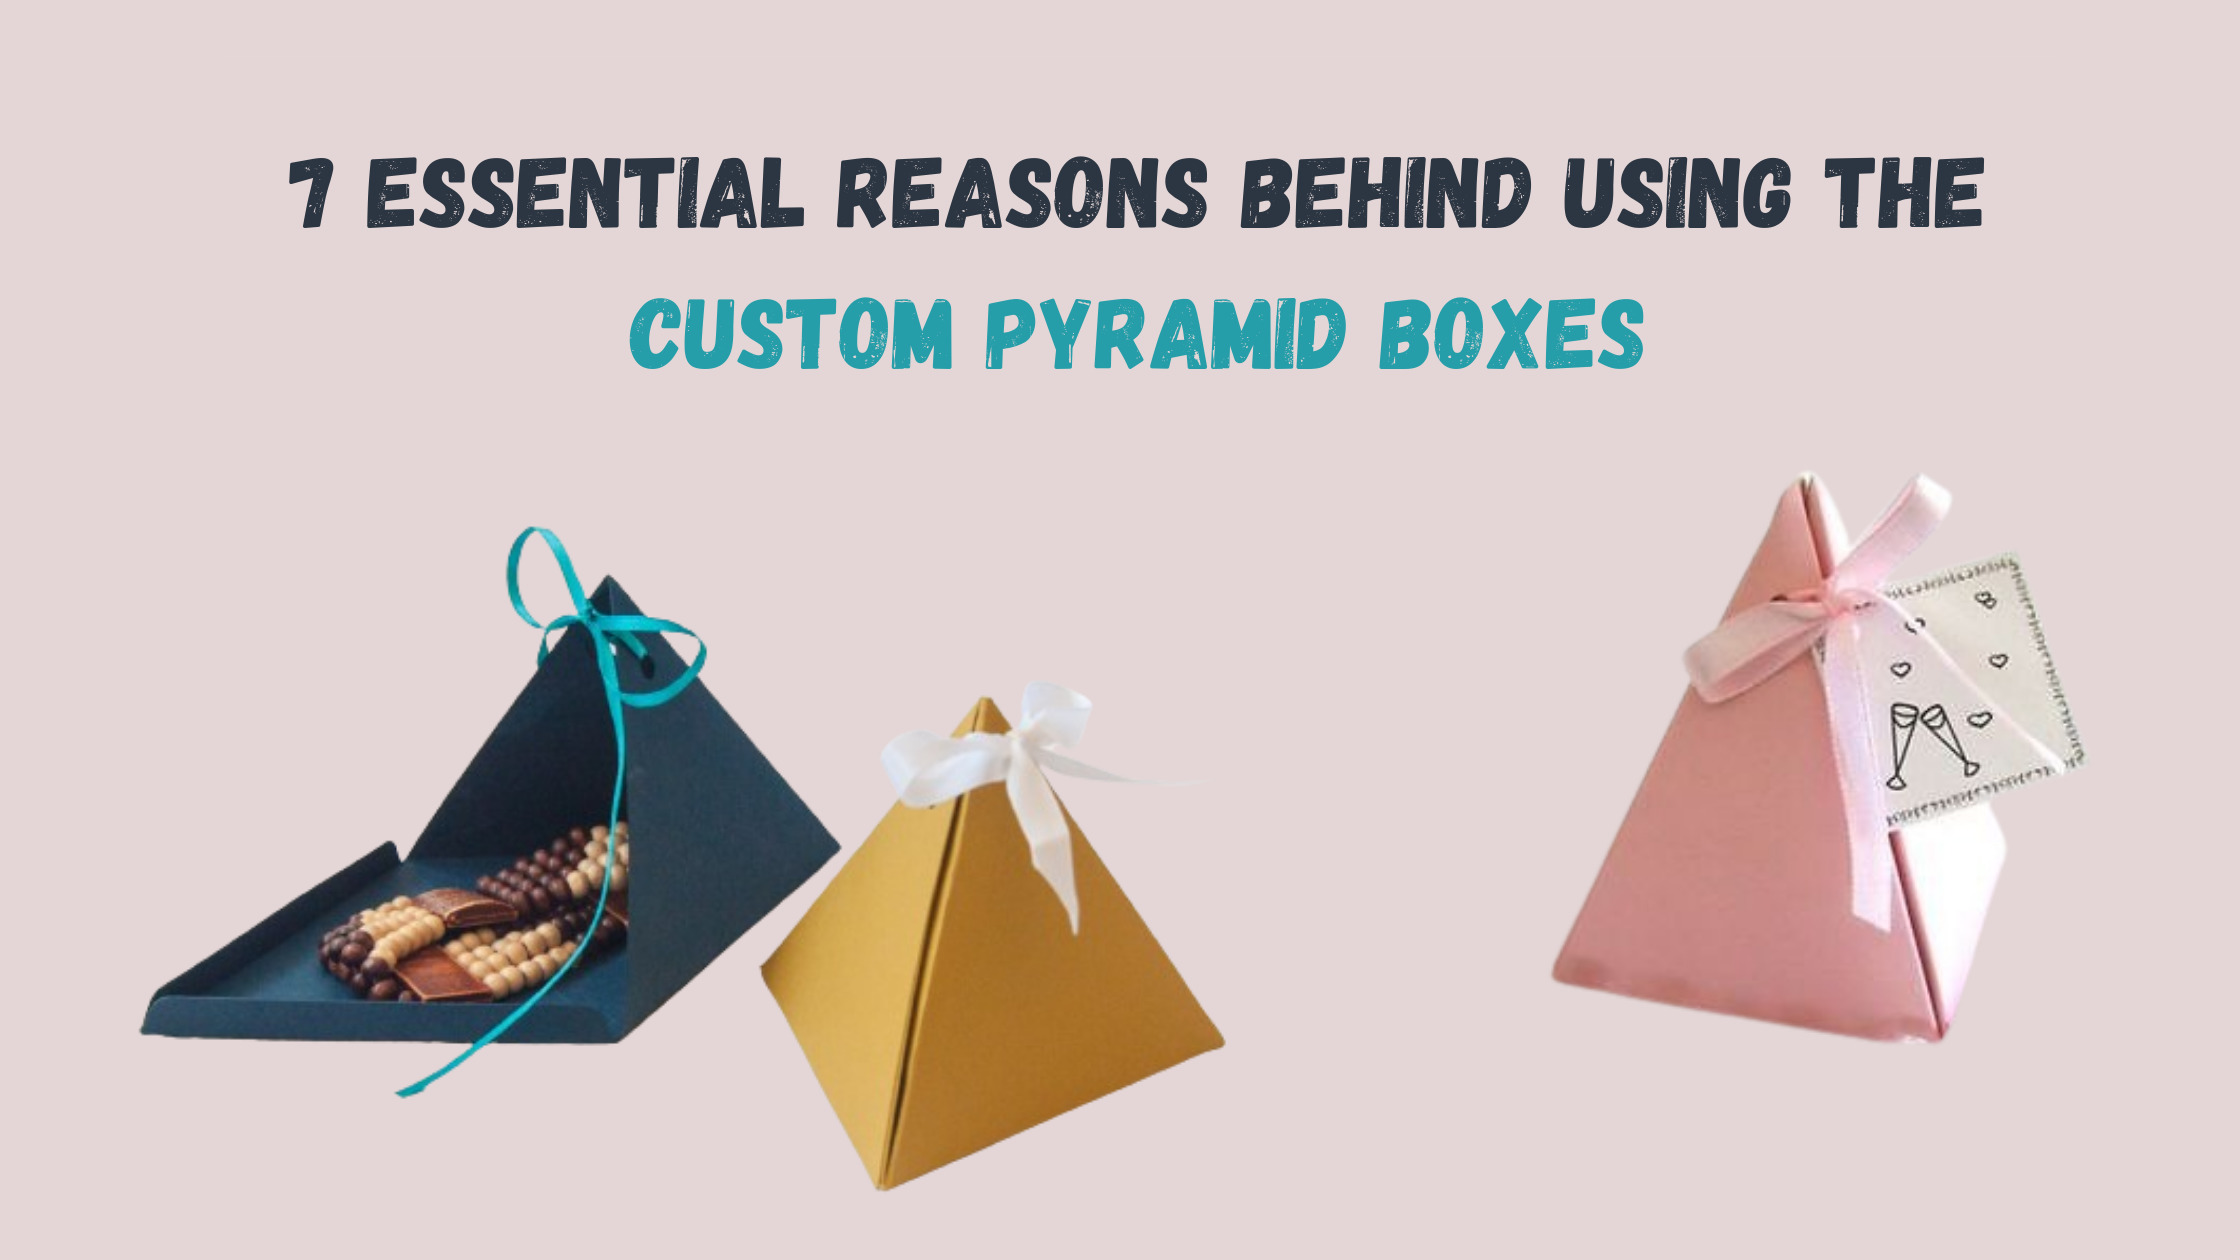 7 Essential Reasons Behind Using The Custom Pyramid Boxes